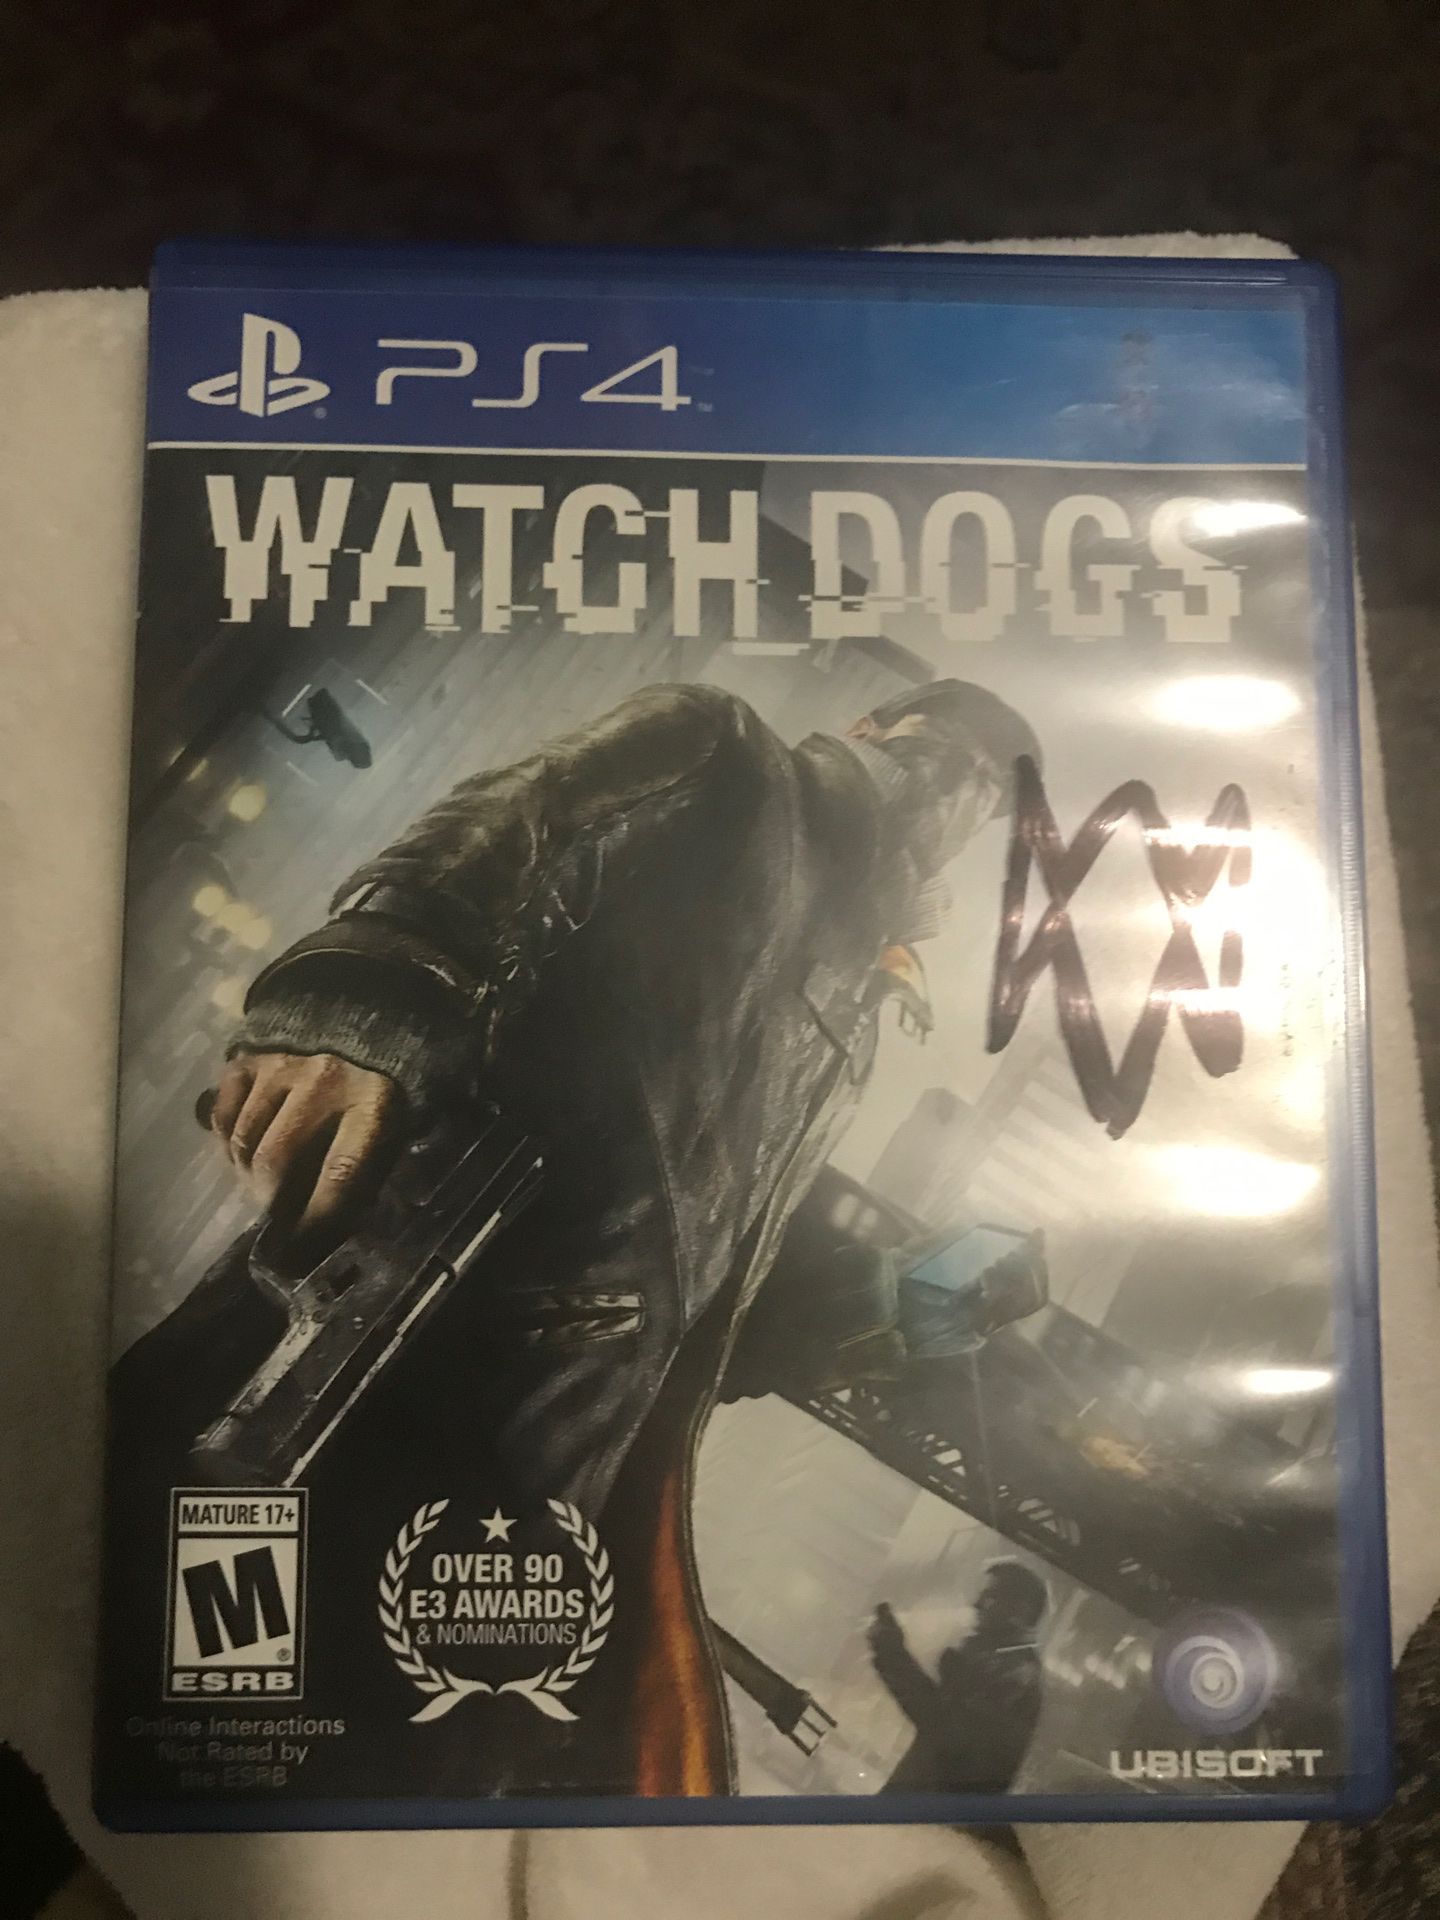 Watch dogs for the ps4